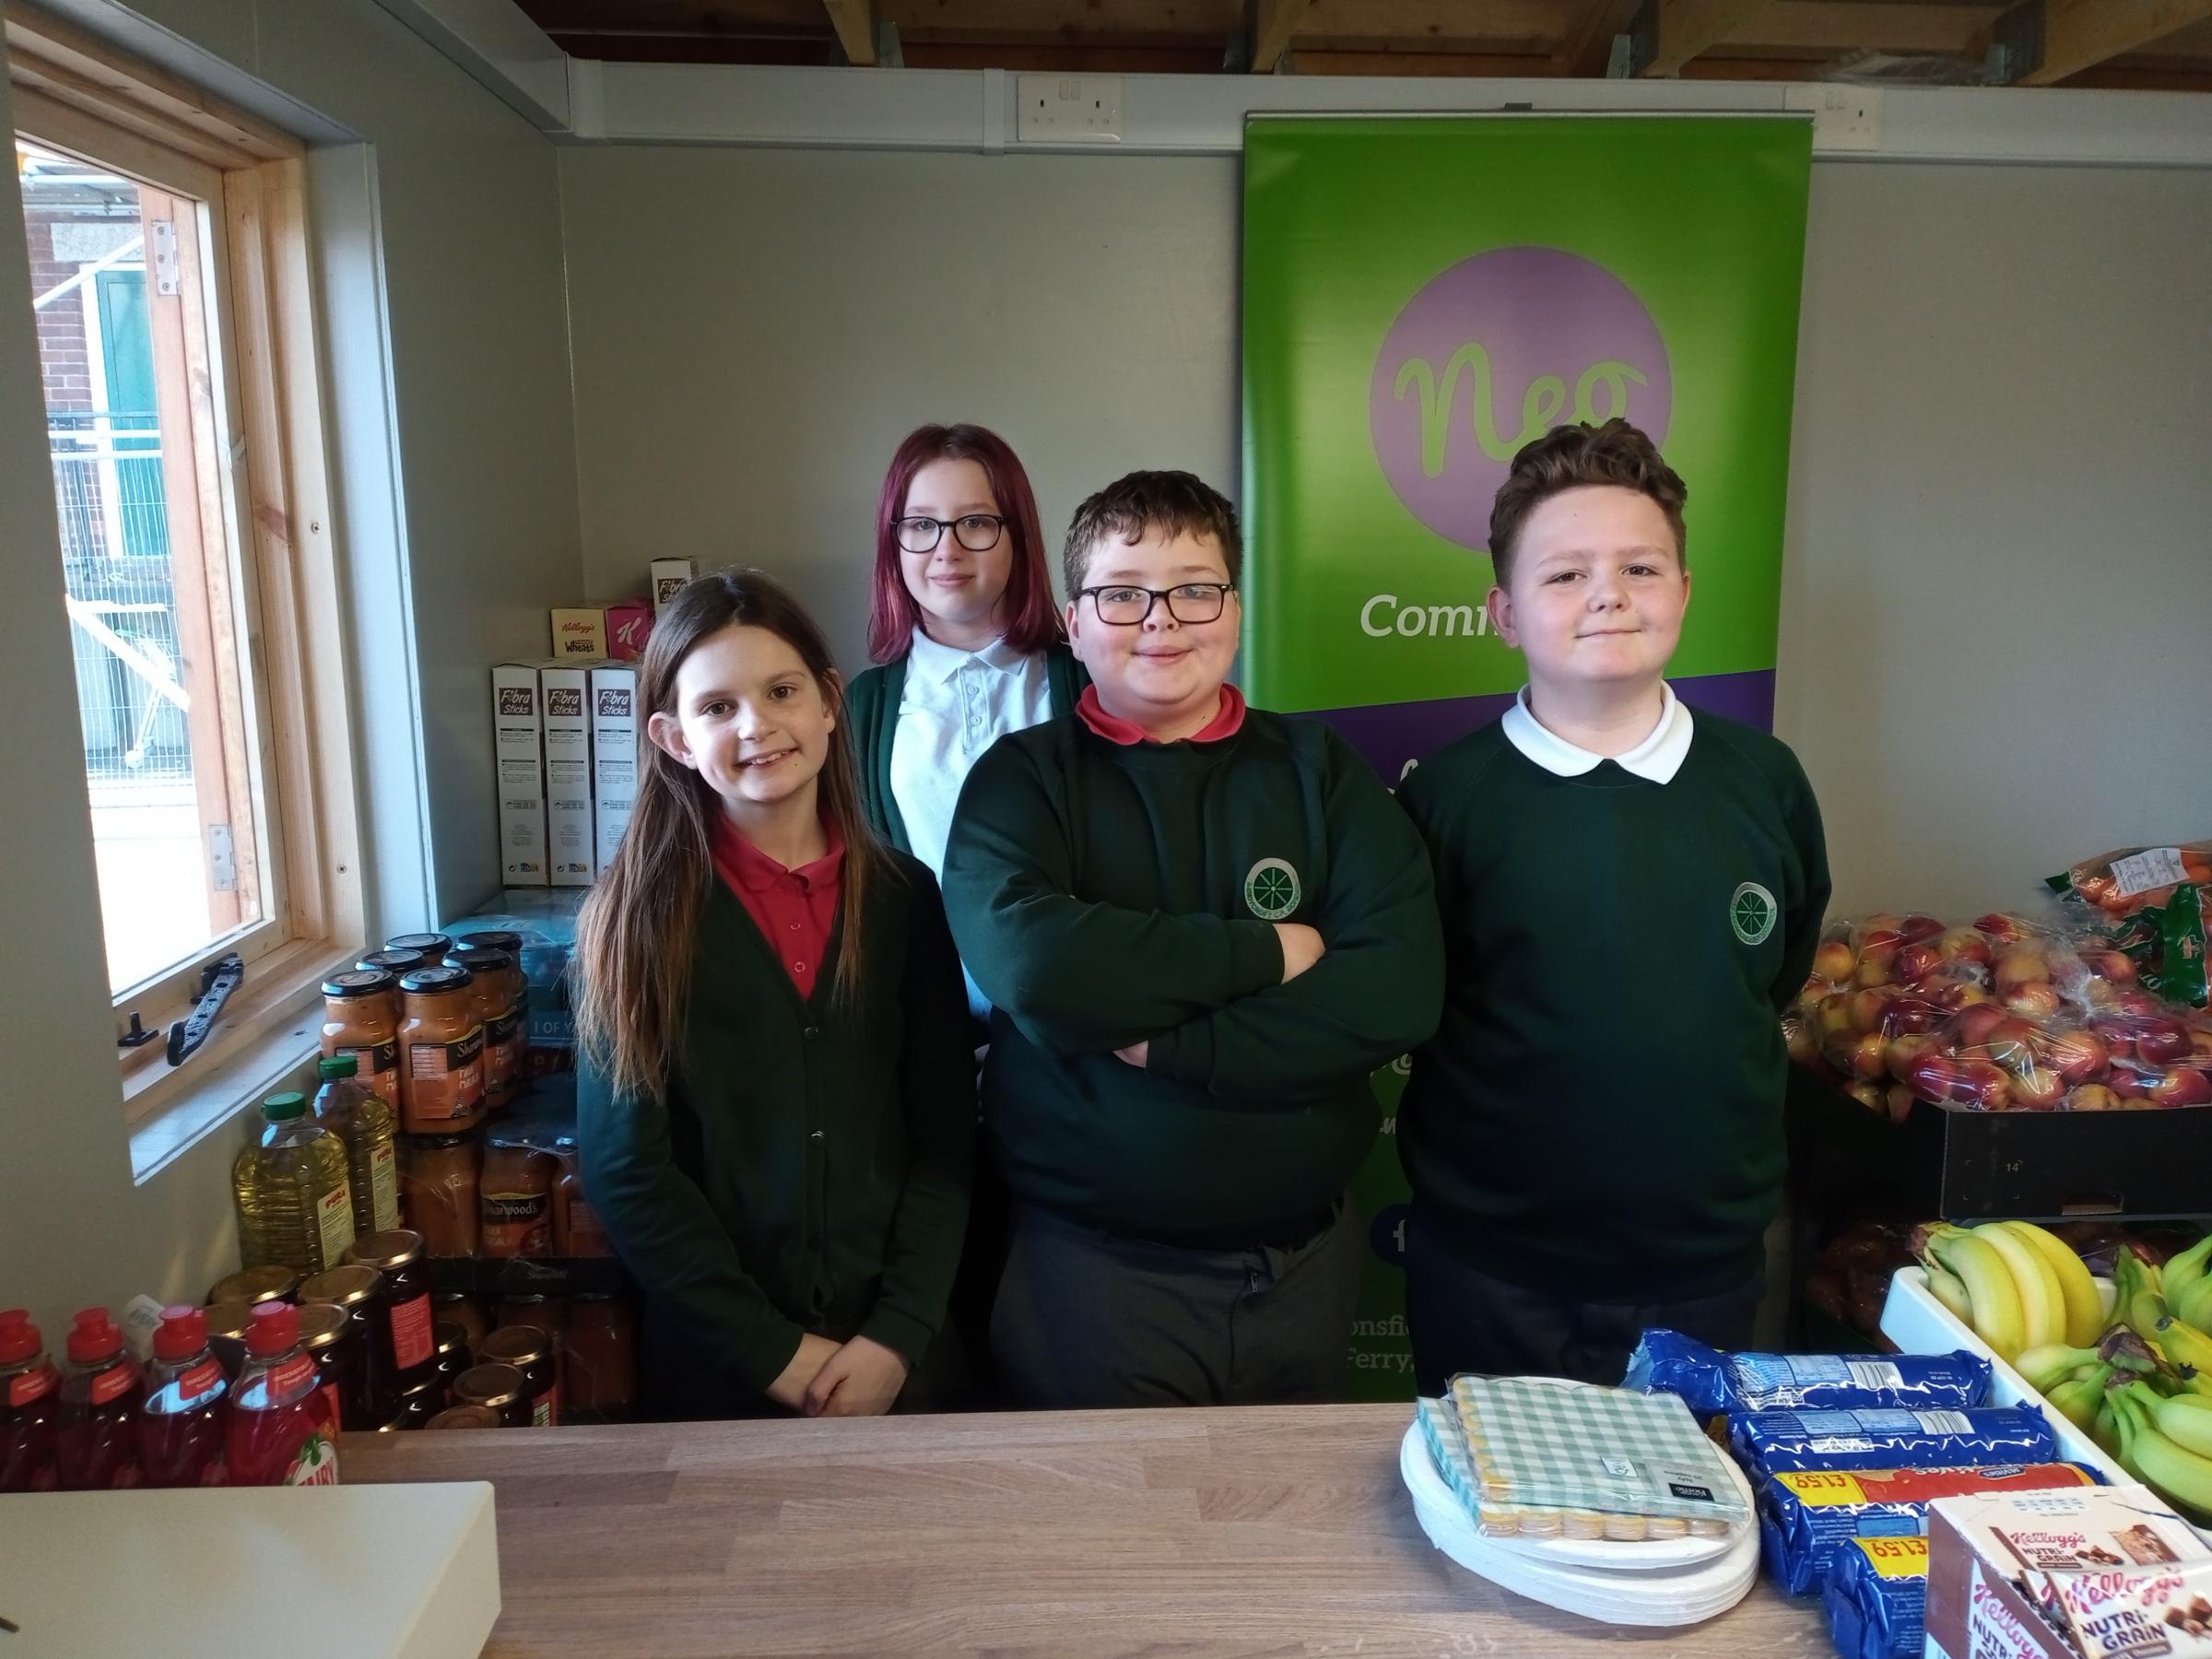 Working in the Sandycroft CP School shop, are pupils Ruby Chaplin-Baker, Bethan Dykinas, Harri Griffiths and David Hughes-Warr.